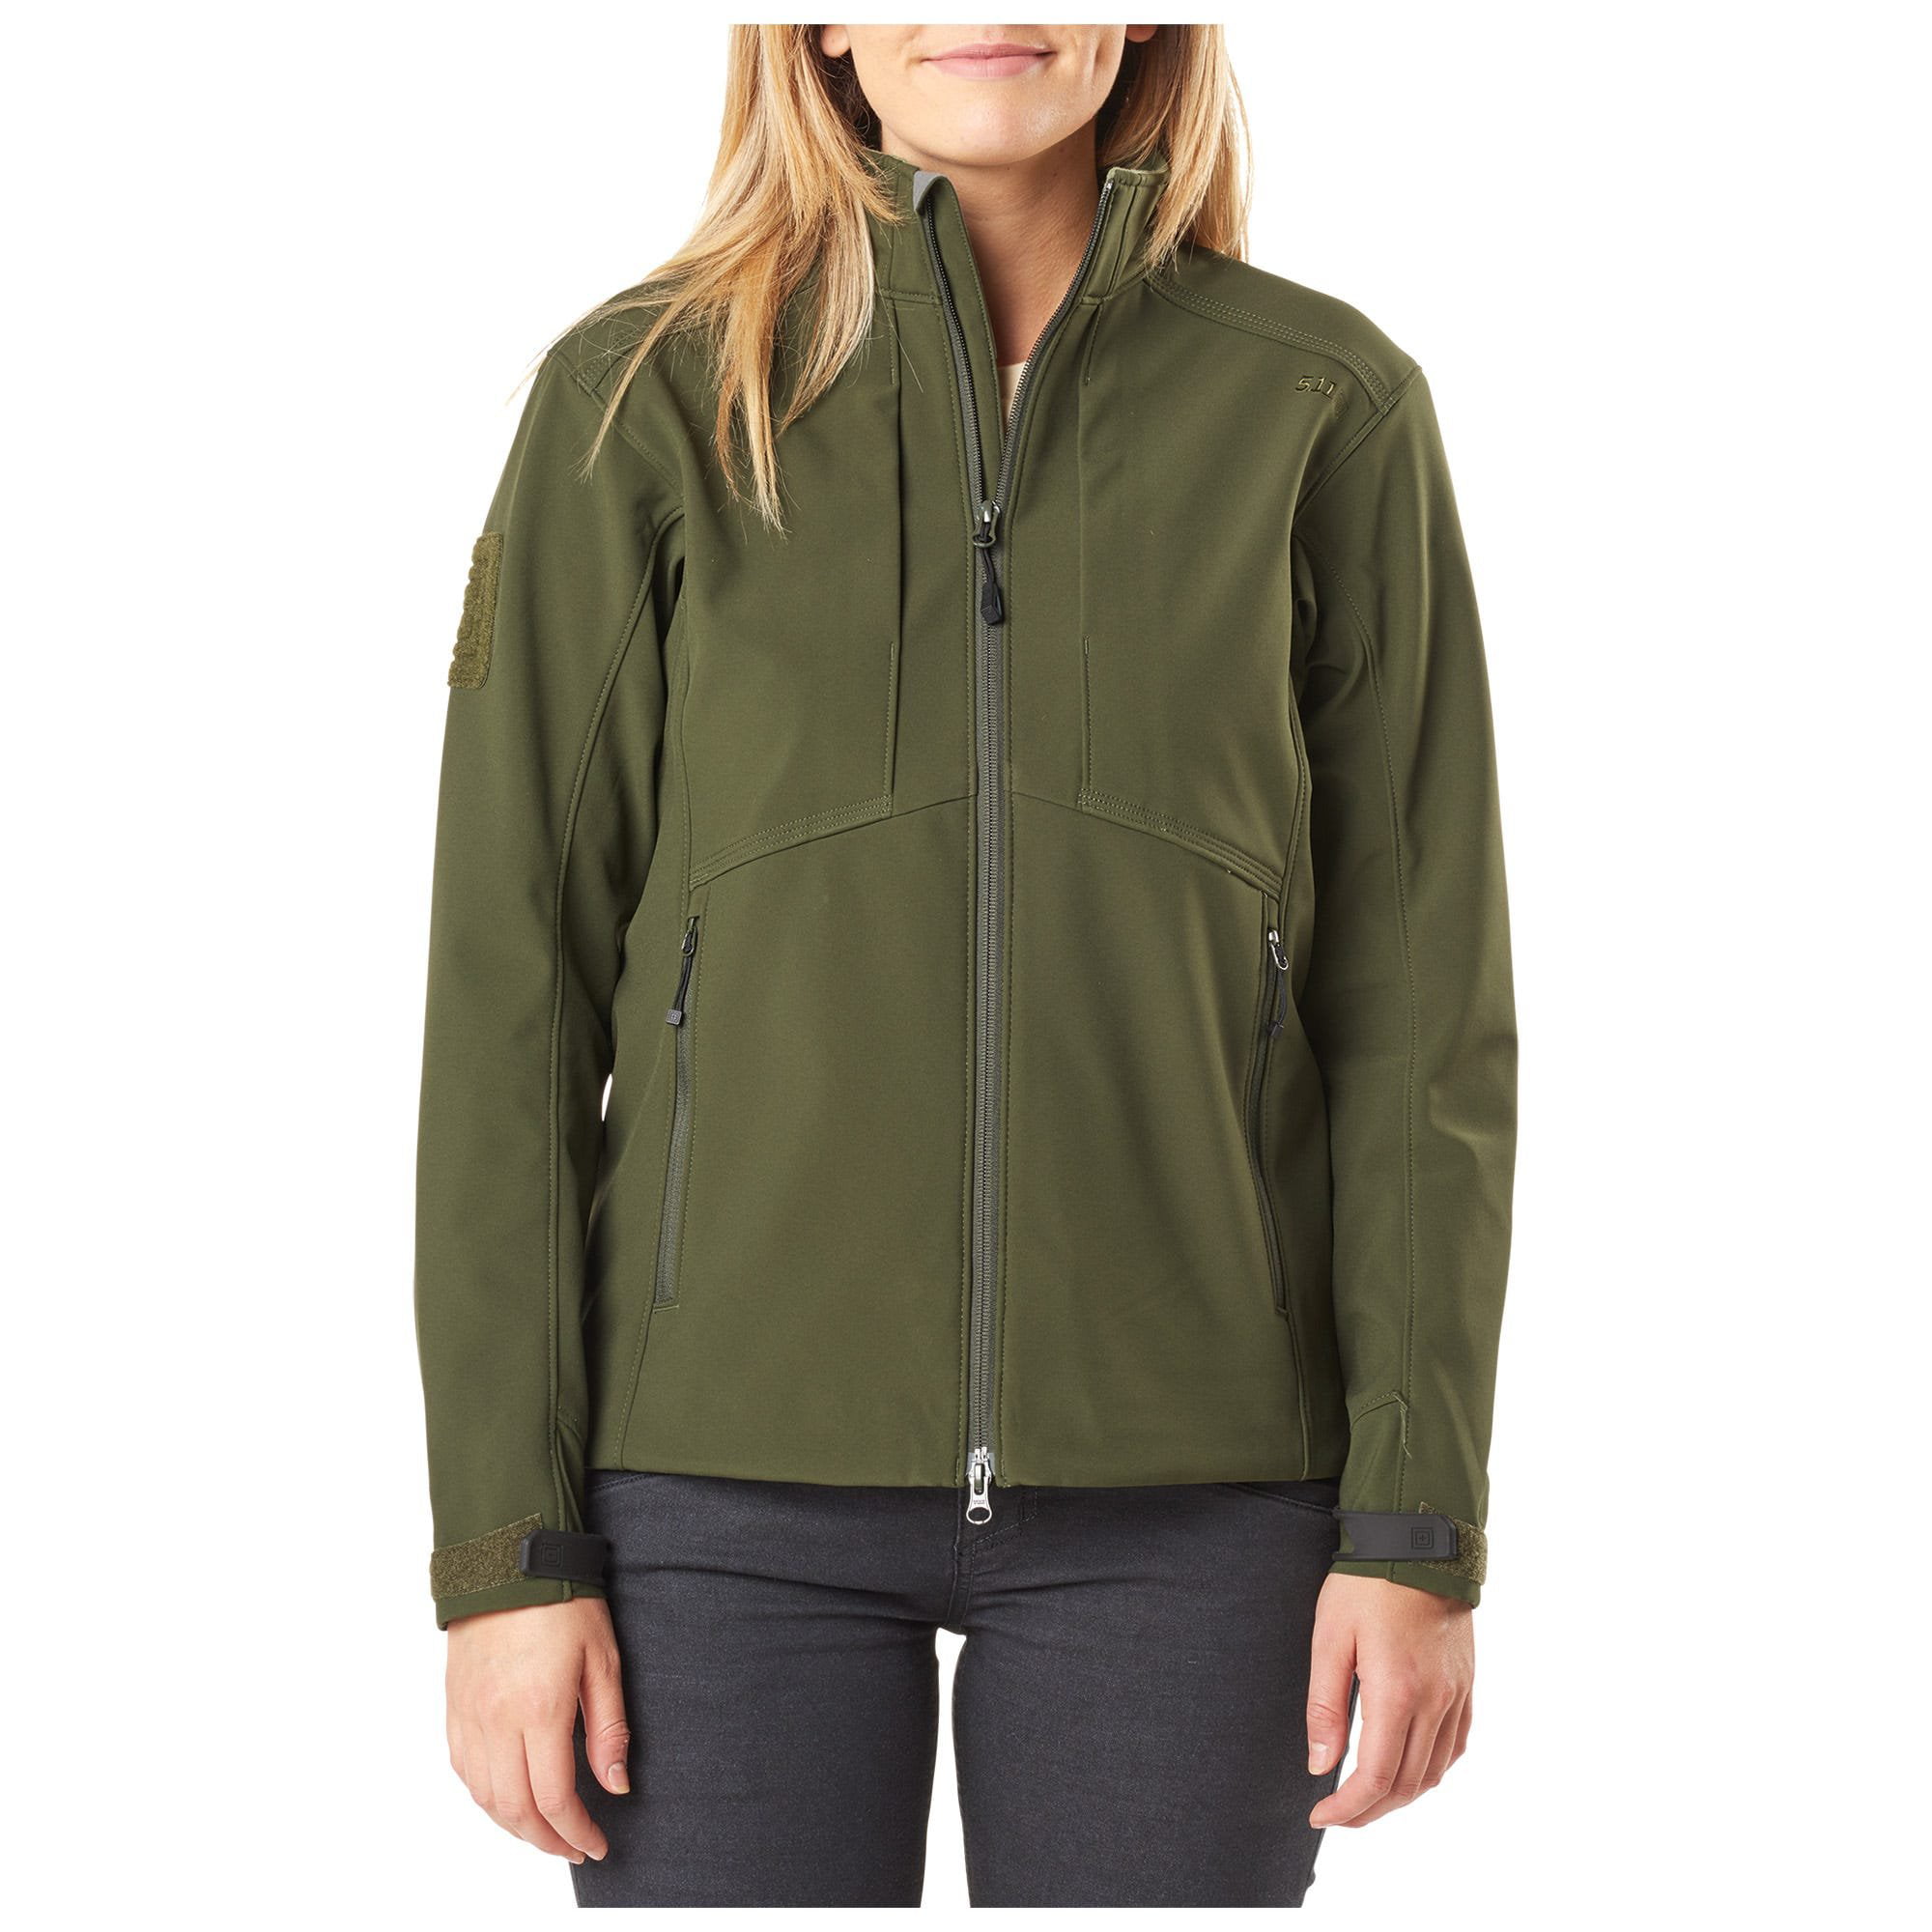 5.11 Tactical Women’s Sierra Softshell Jacket, 100% Polyester, Micro ...